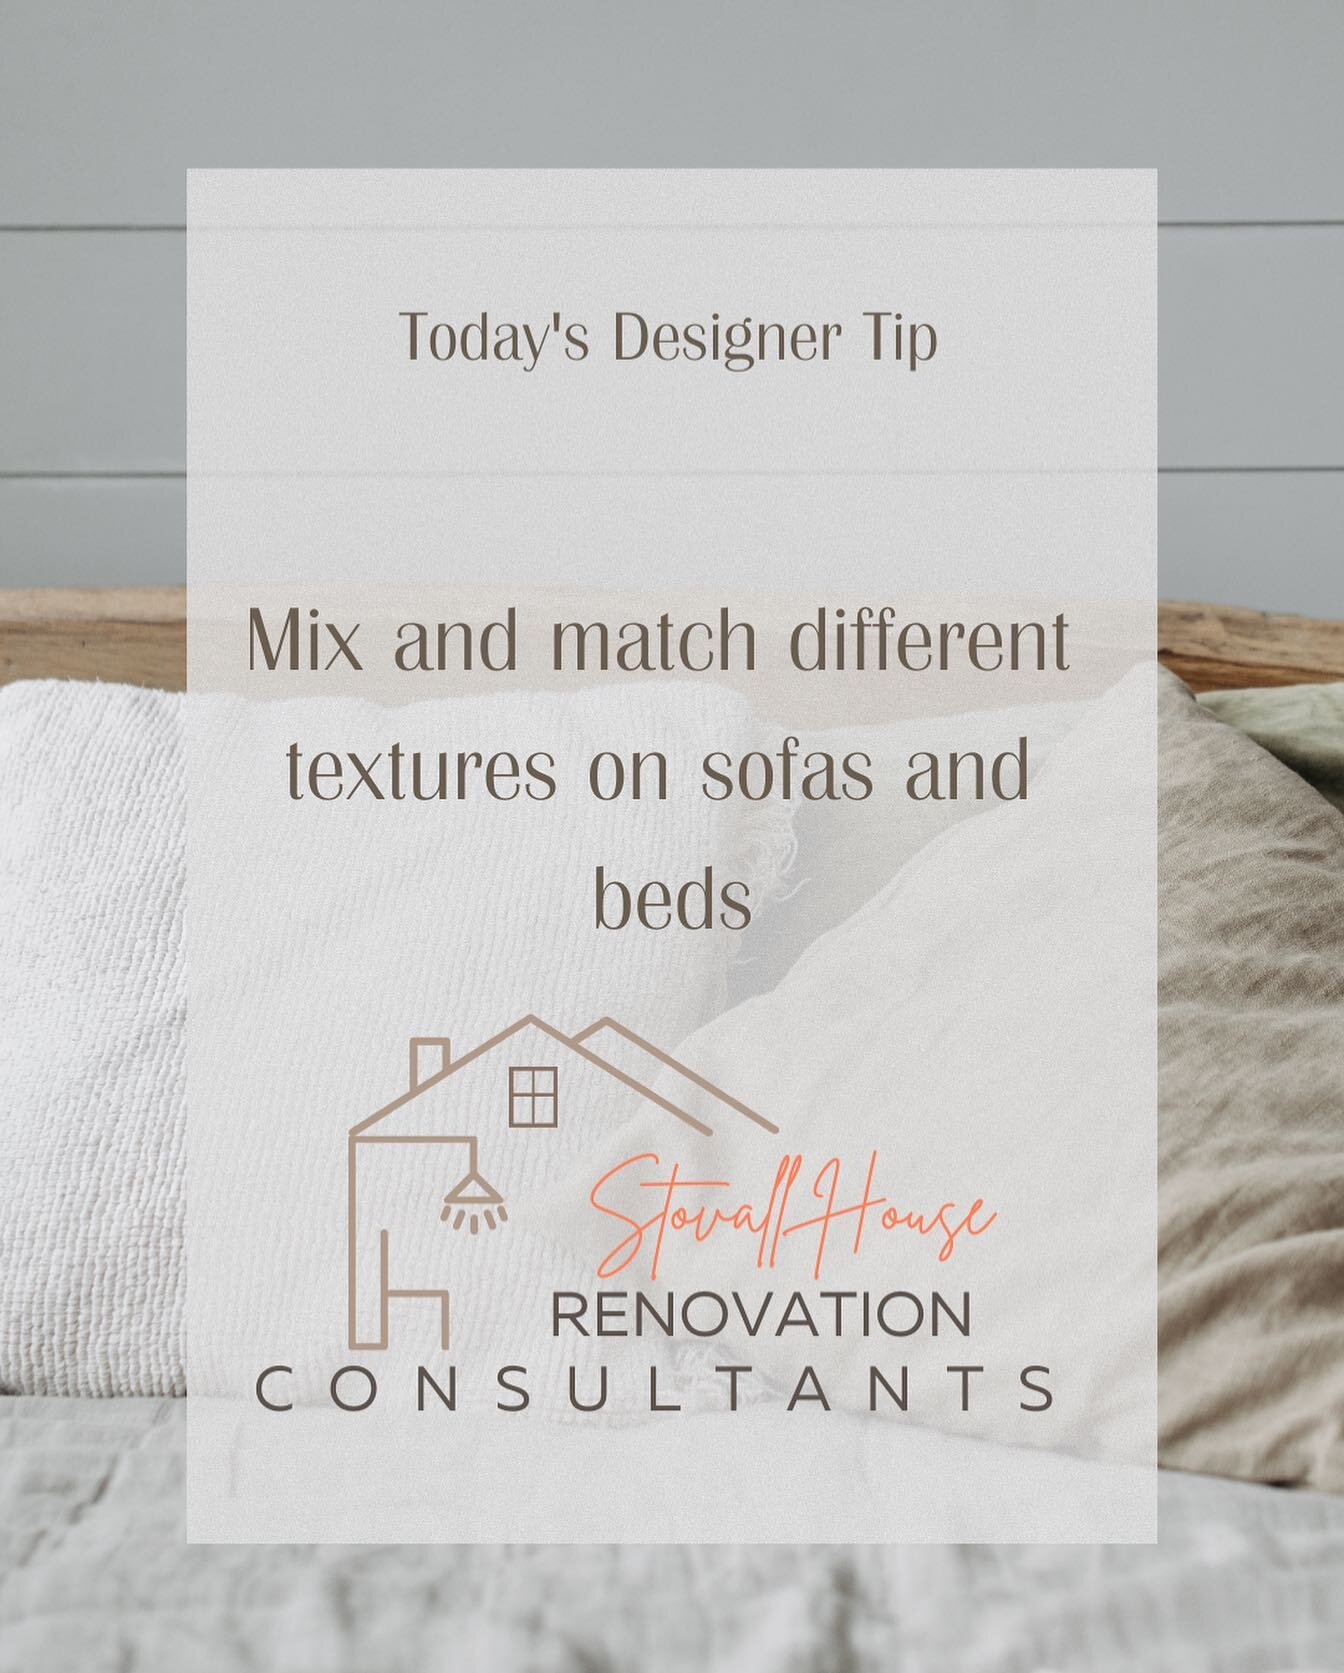 Mixing textures on sofas and beds can add visual interest and depth to your space. You can achieve this by combining materials such as velvet, linen, leather, and wool. Consider incorporating pillows, throws, and blankets in different textures to cre